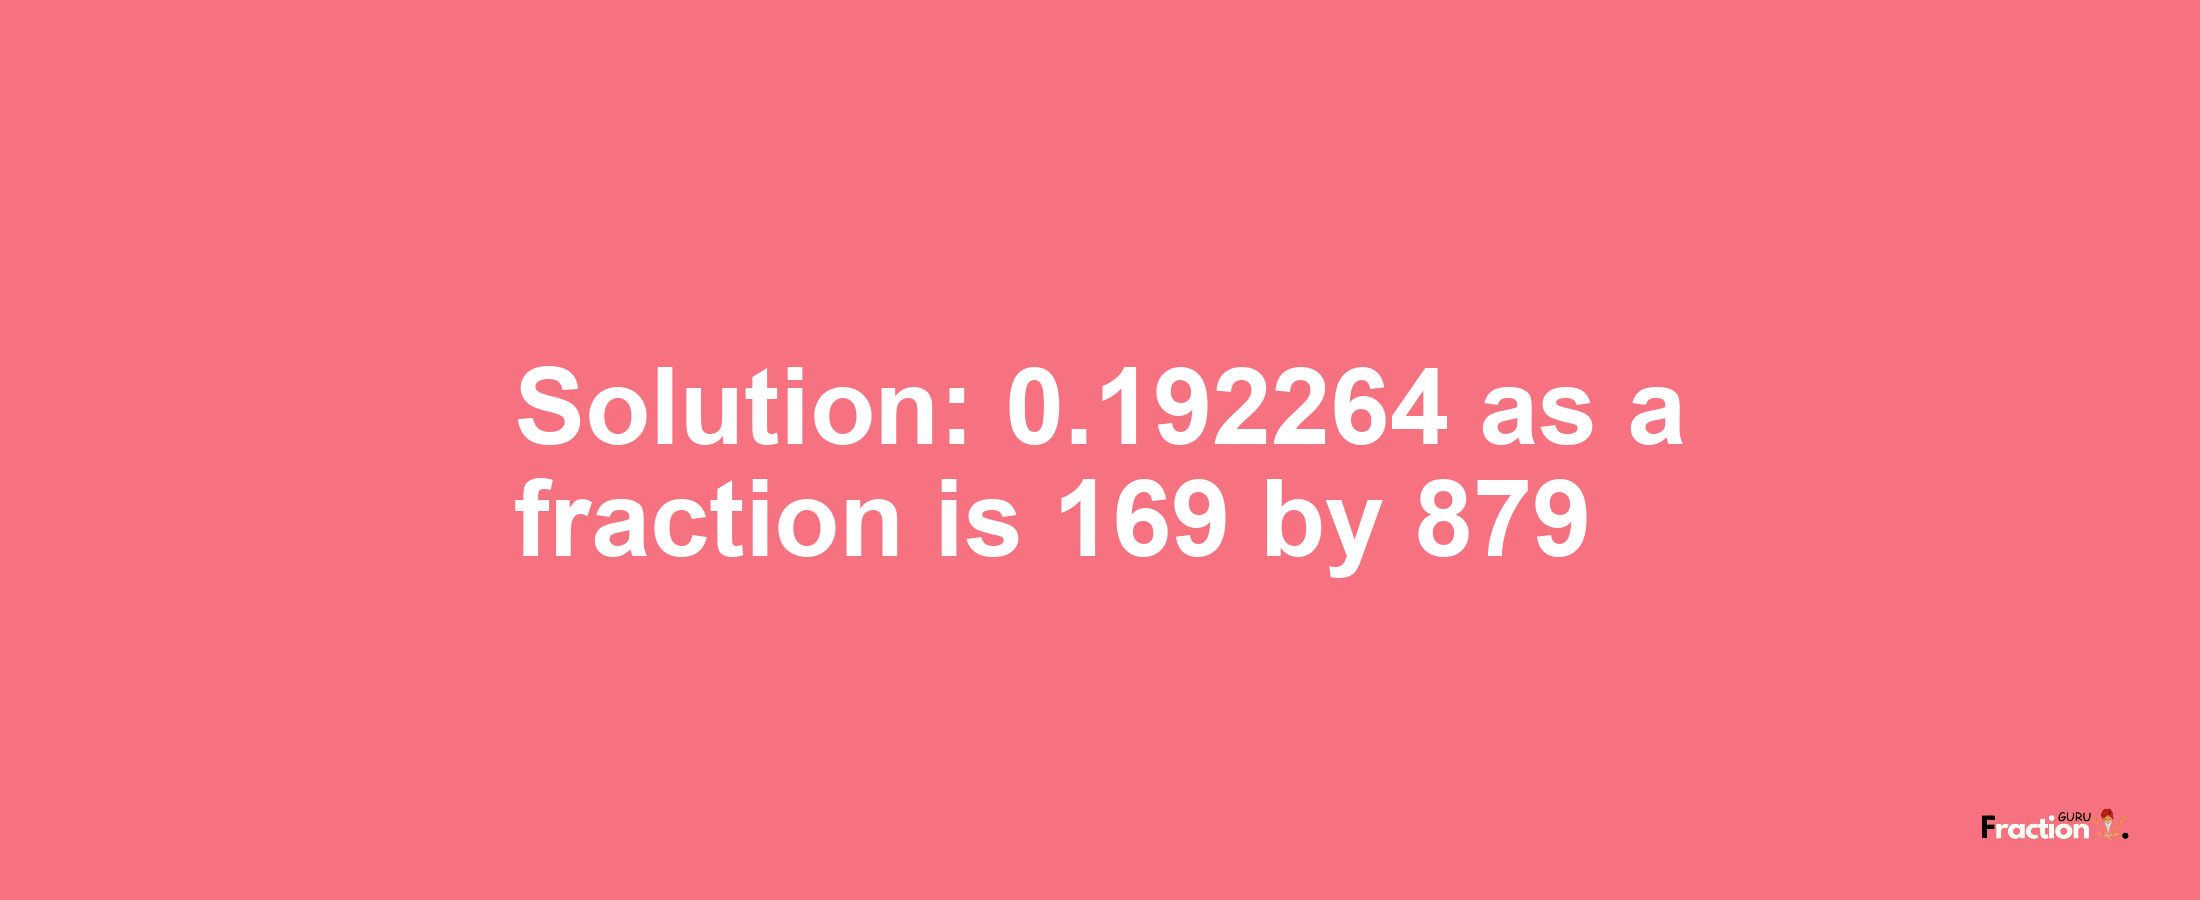 Solution:0.192264 as a fraction is 169/879